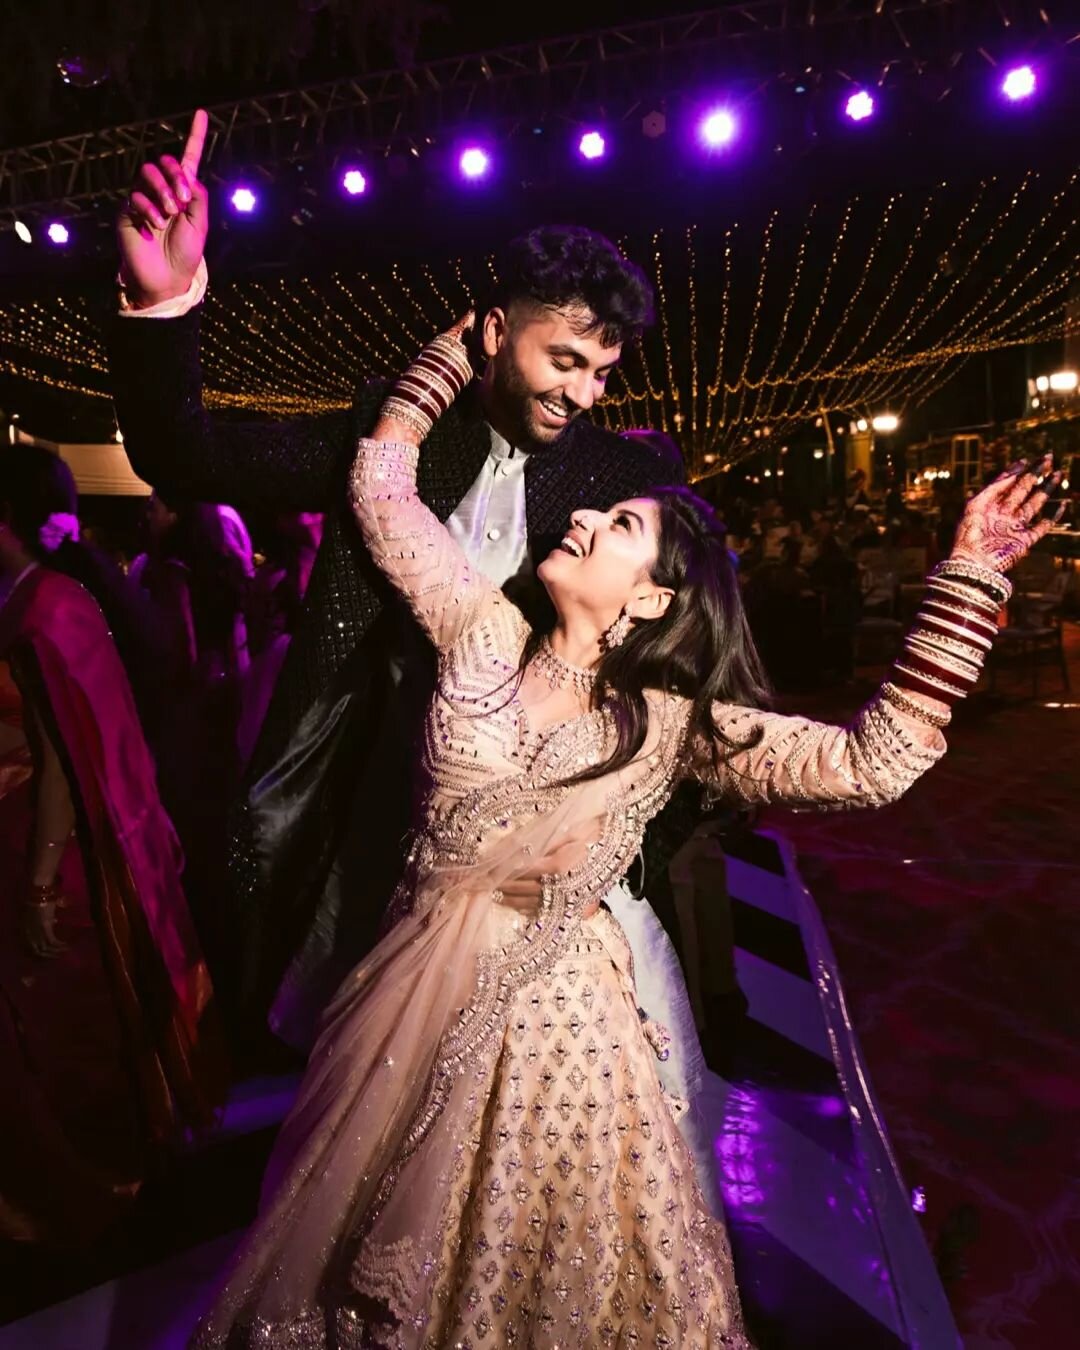 Grab your cocktail shakers and put on your dancing shoes because Snehal and Umang's Sangeet cum Cocktail party is in full swing! 🥂

The venue is transformed into a glamorous hotspot, with lights twinkling like stars in the sky and cocktails served i